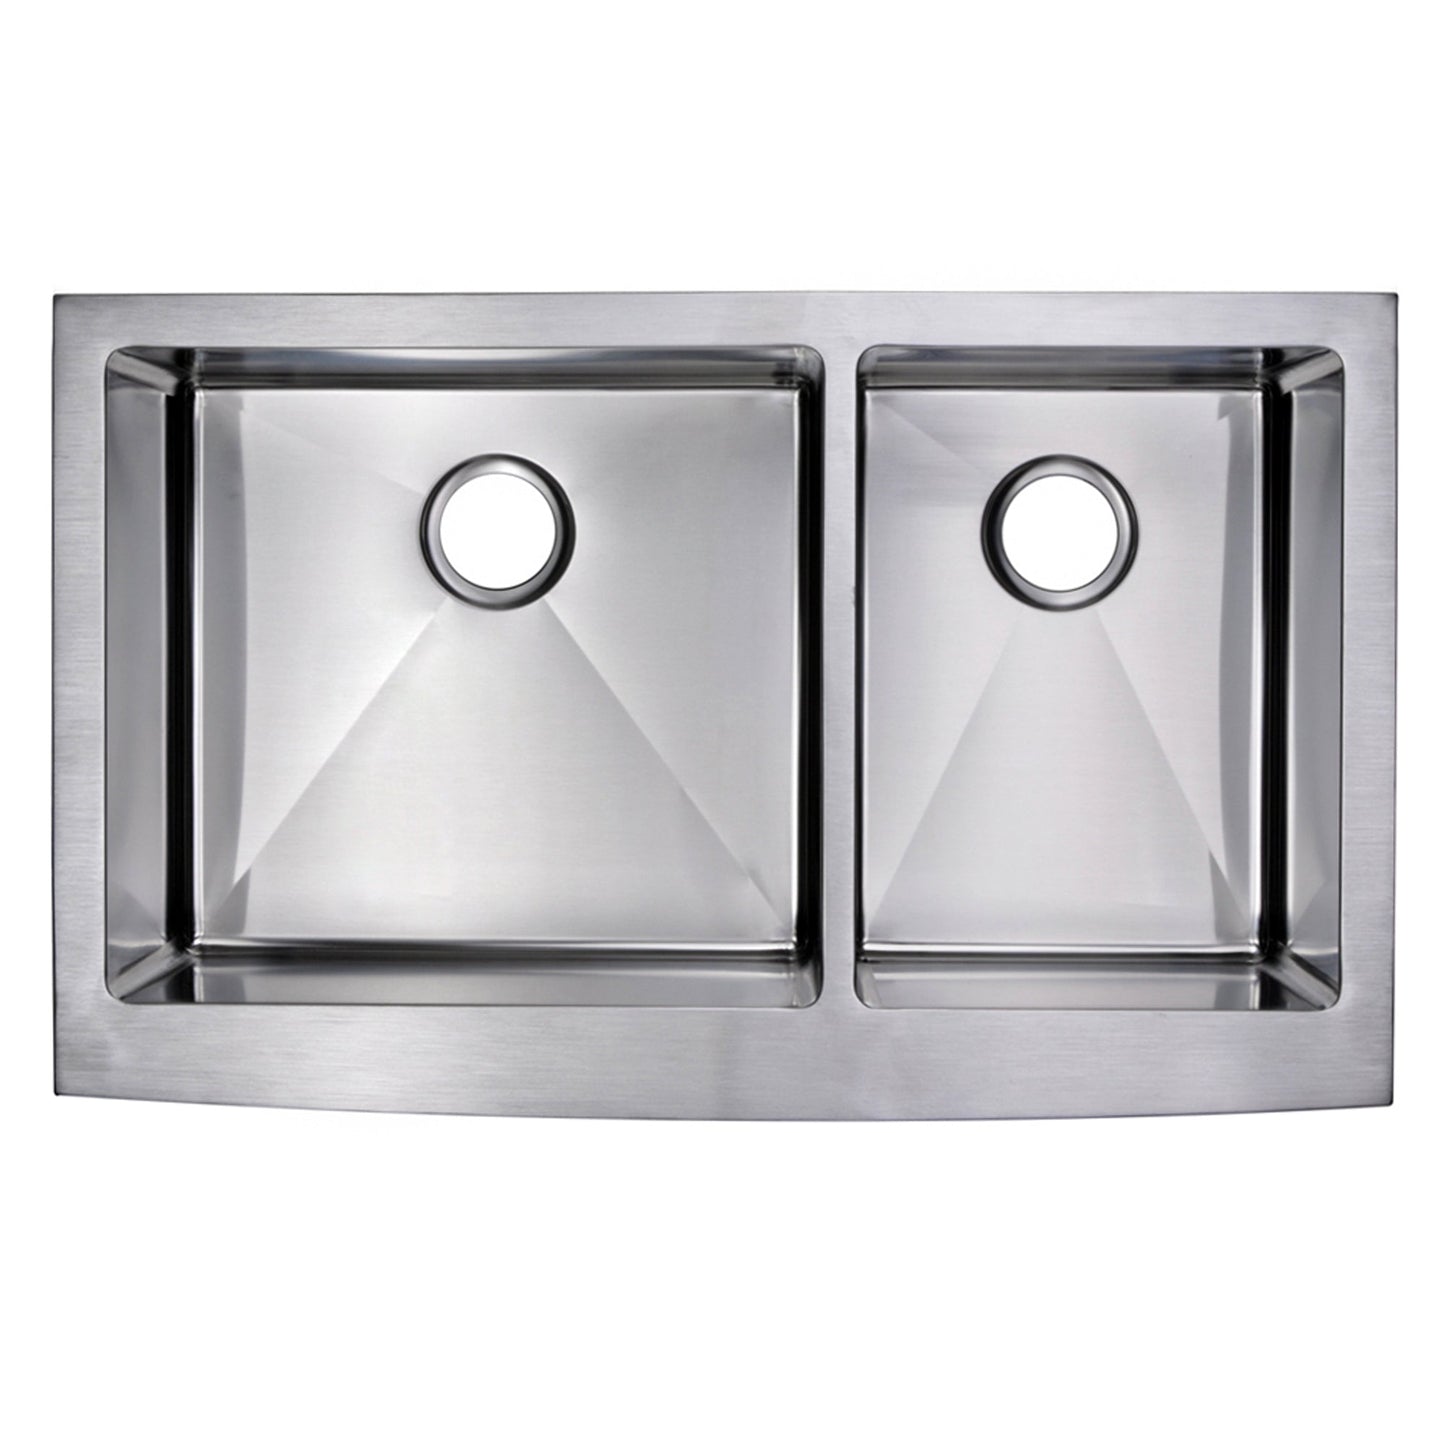 36 Inch X 22 Inch 15mm Corner Radius 60/40 Double Bowl Stainless Steel Hand Made Apron Front Kitchen Sink With Drains, Strainers, And Bottom Grids